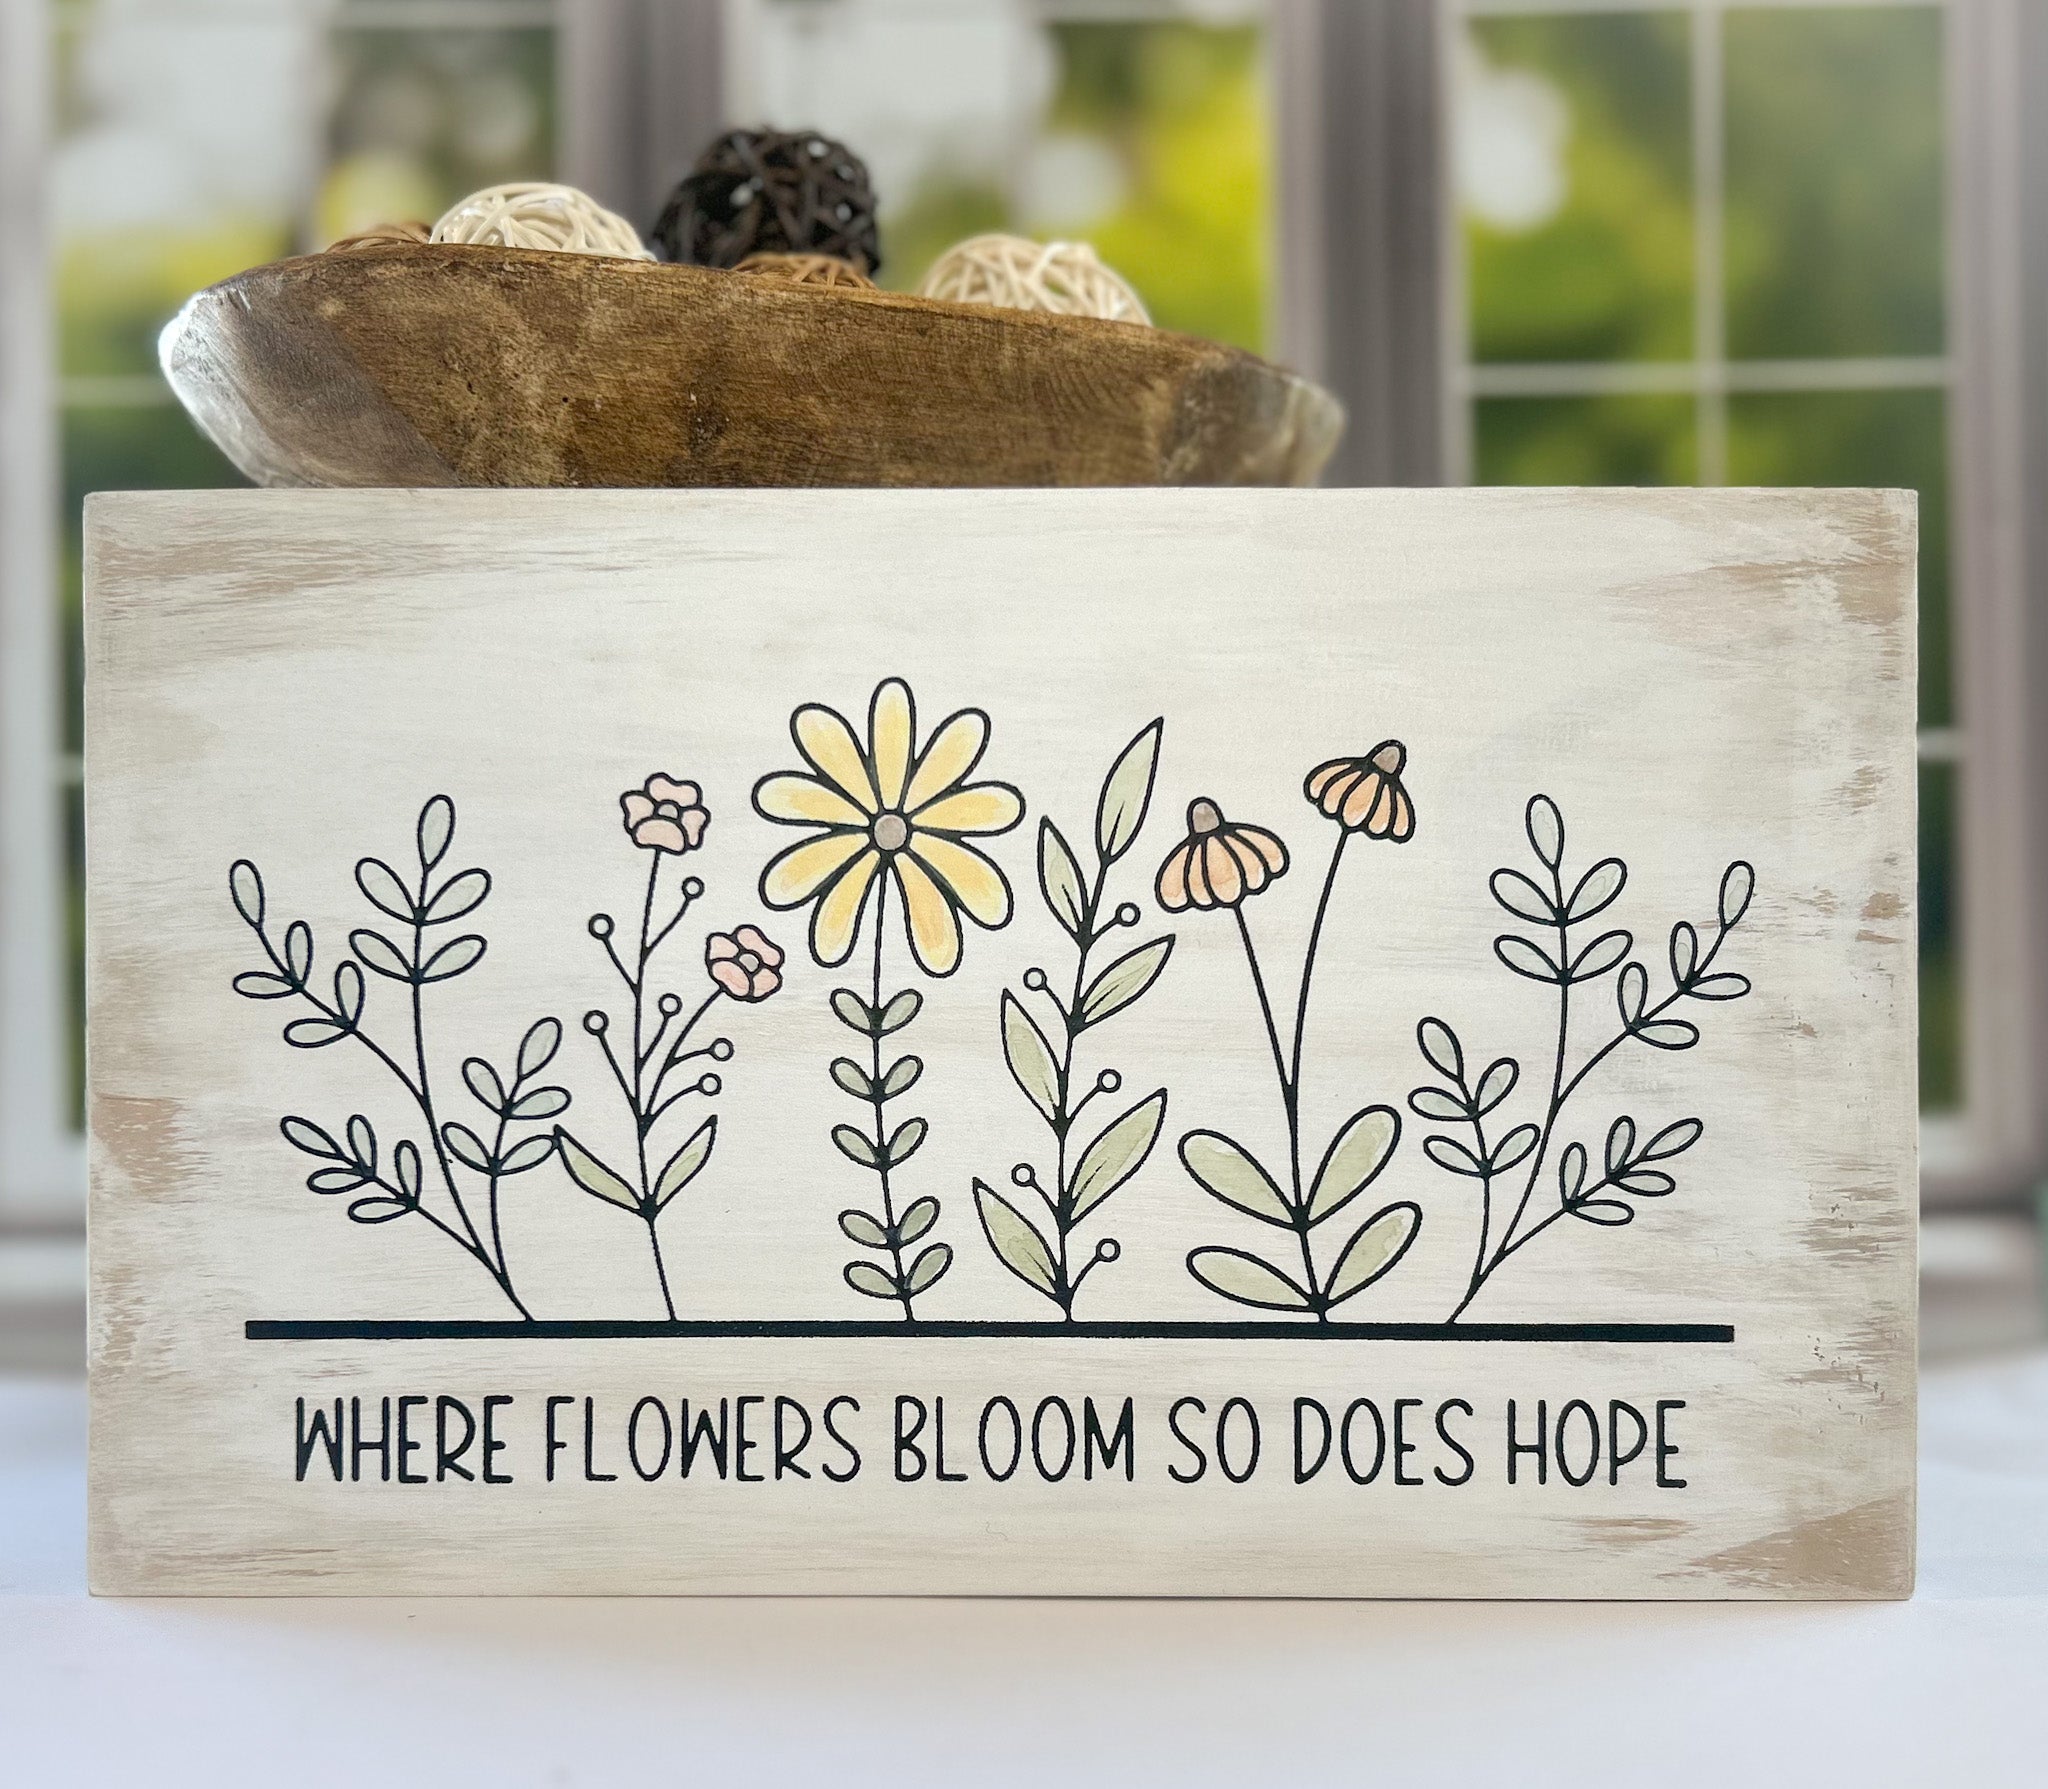 HOPE BLOOMS FLOWERS AND THINGS!